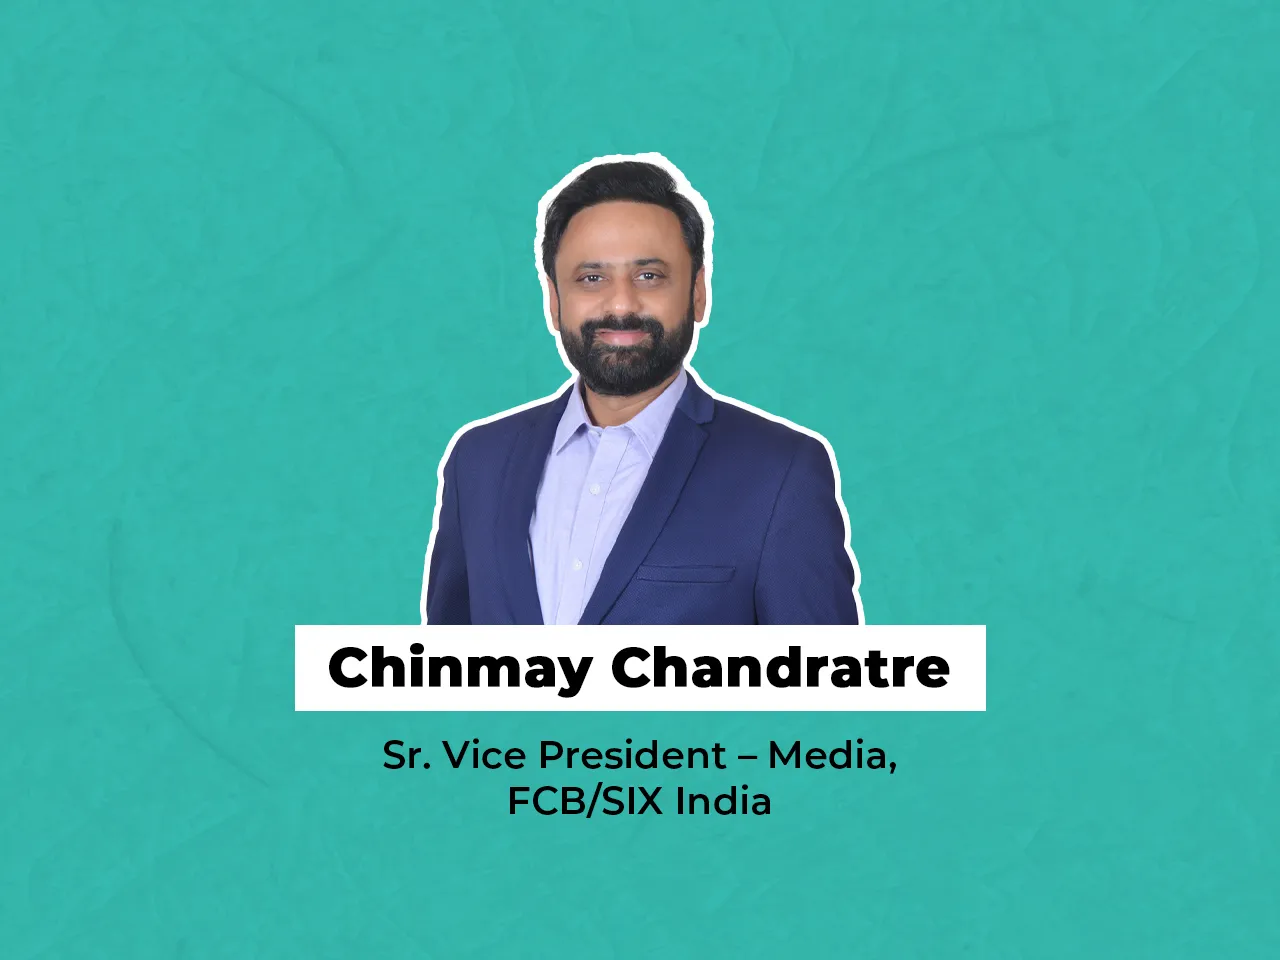 Chinmay Chandratre